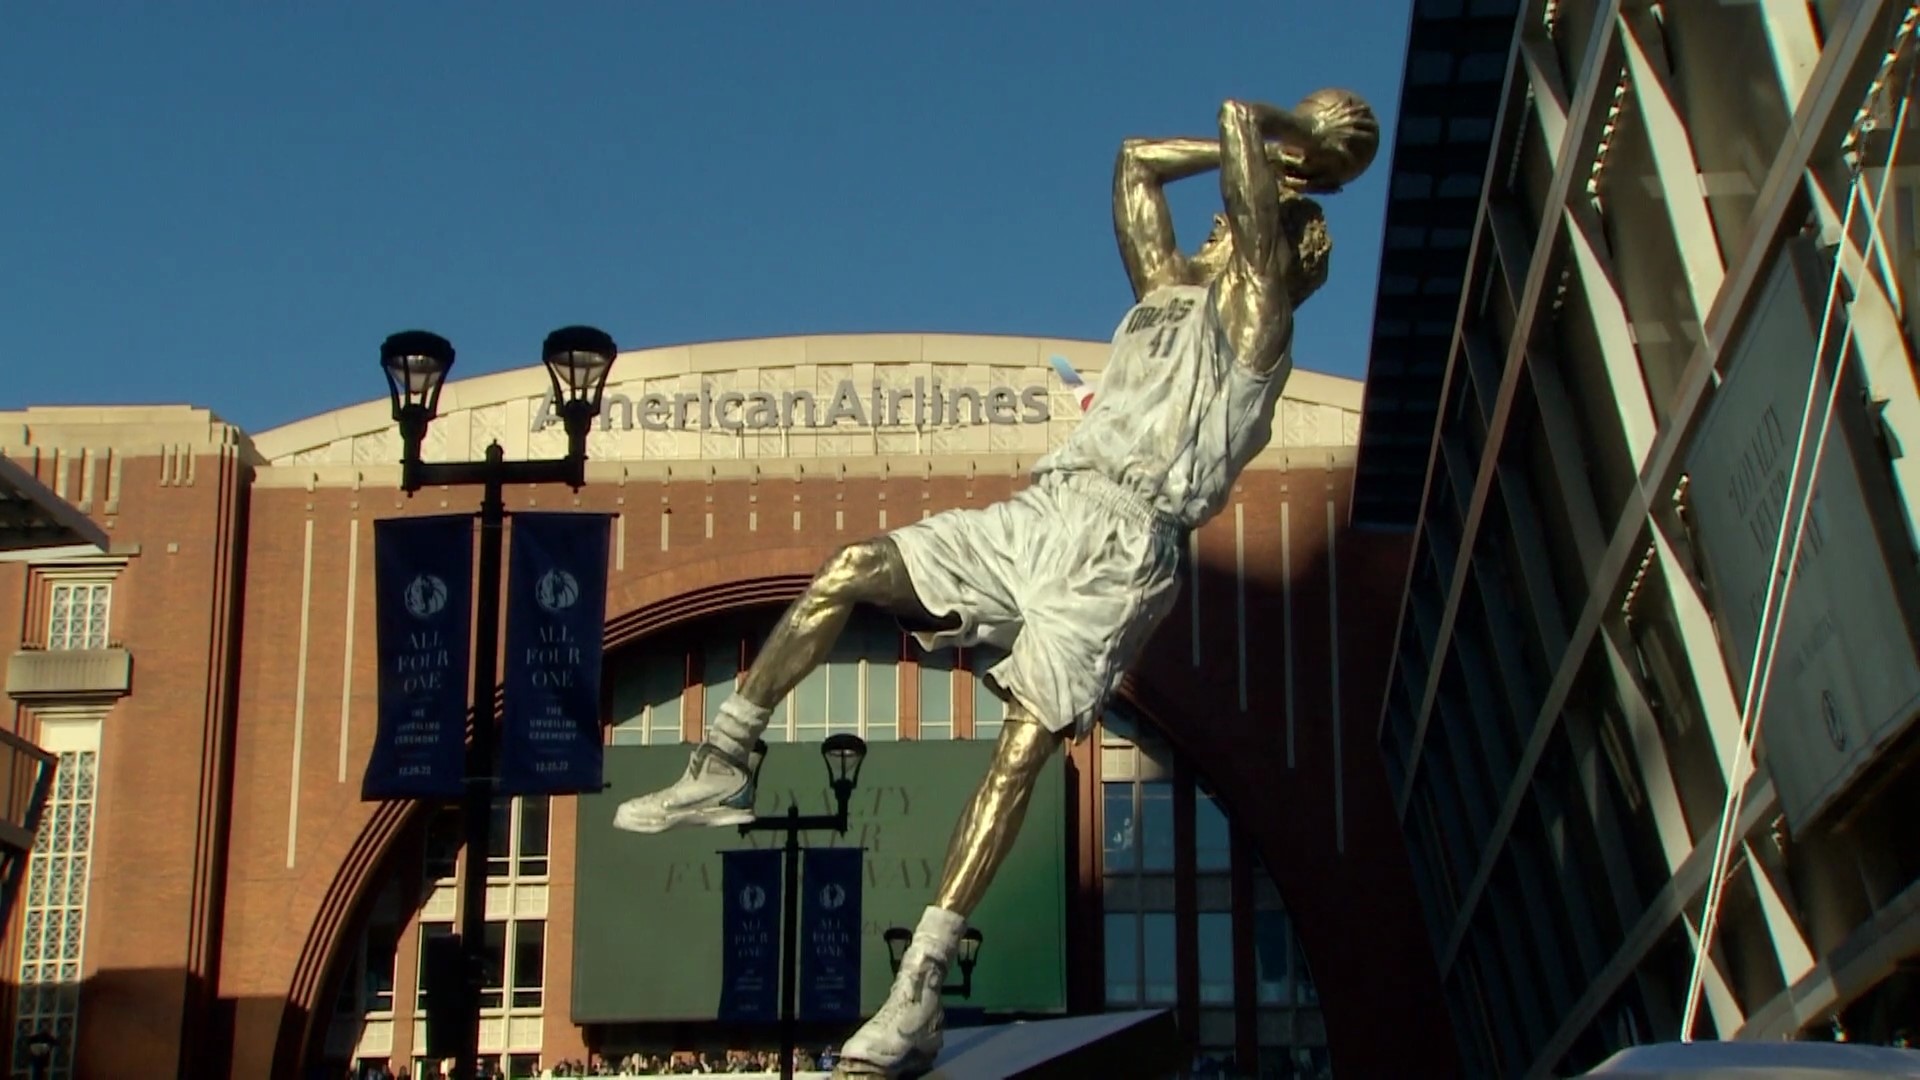 On Christmas morning, the Dallas Mavericks unveiled a larger-than-life statue of Dirk Nowitzki on the American Airlines Center plaza.